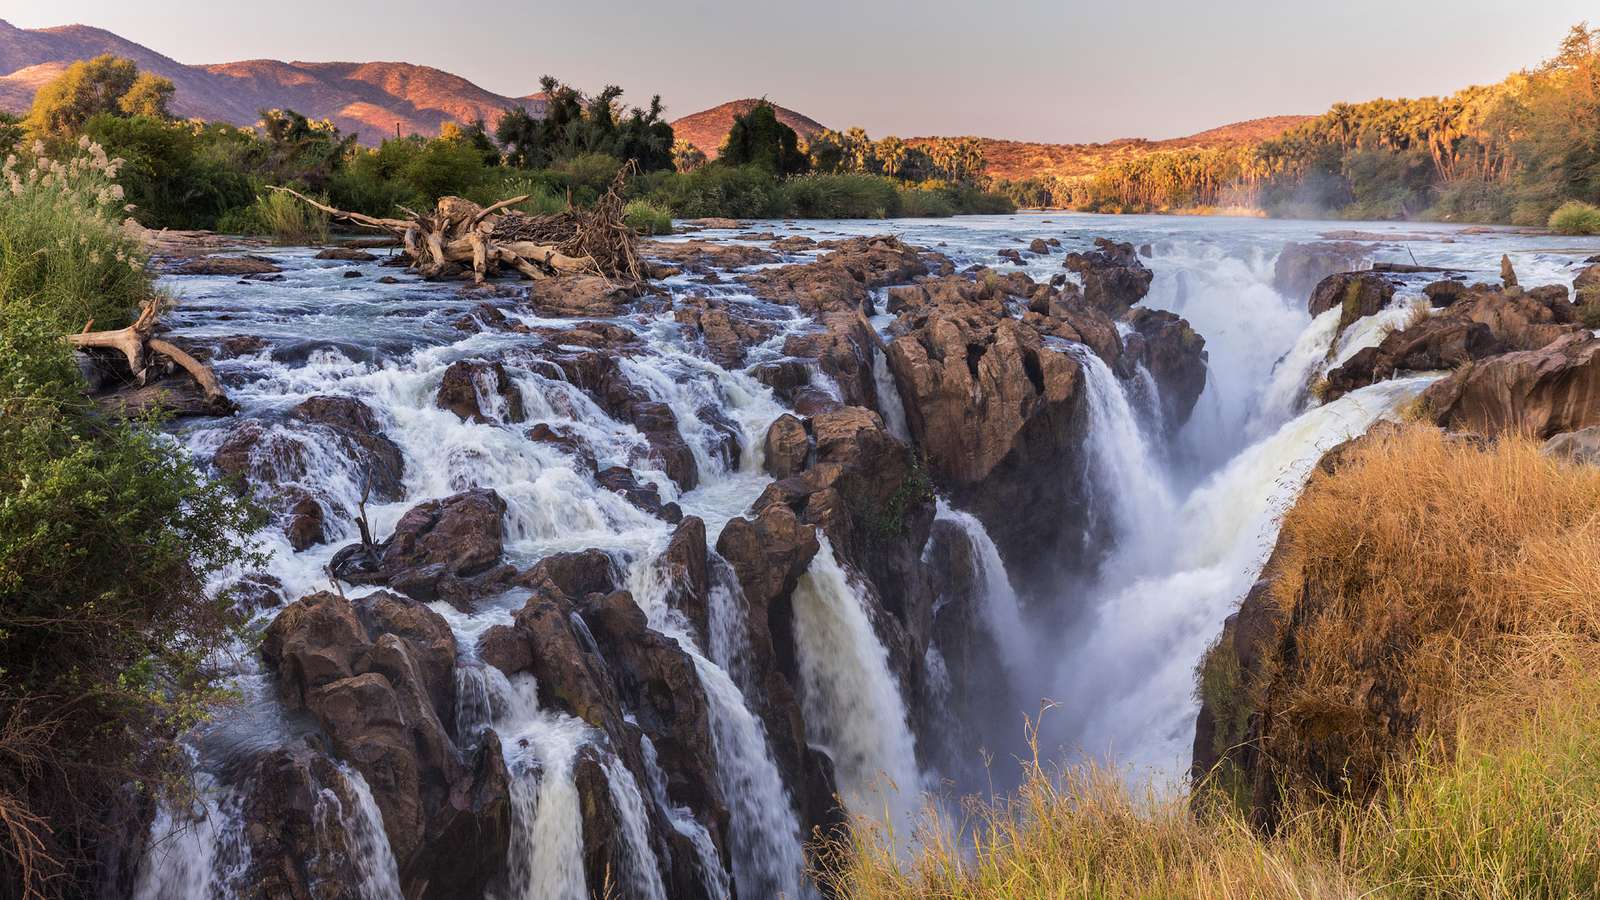 Epupa-Wasserfall in Namibia Puzzlespiel online